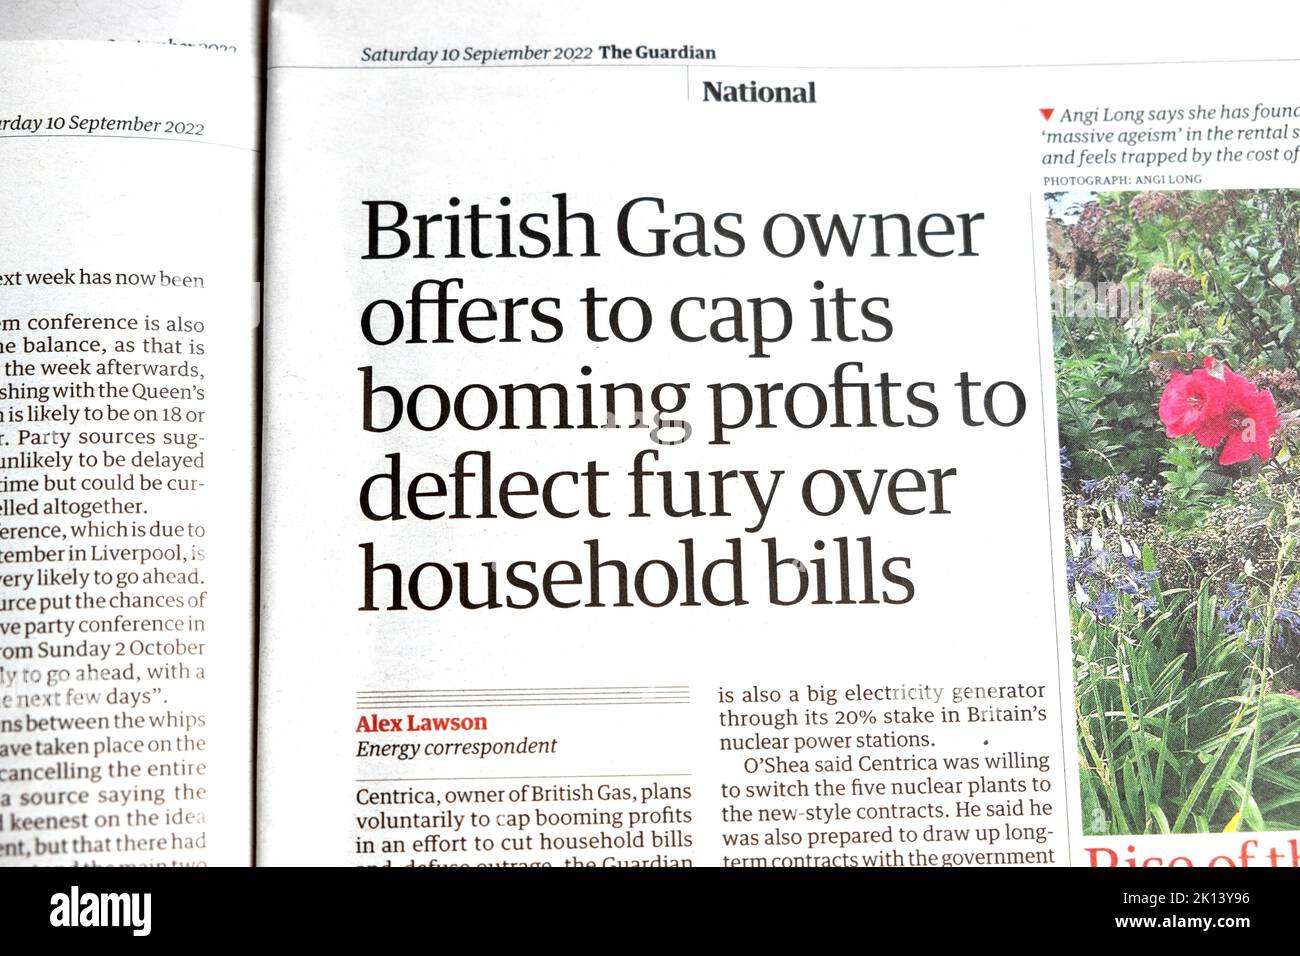 'British Gas owner offers to cap its booming profits to deflect fury over household bills' Guardian newspaper headline fuel 10 September London UK Stock Photo